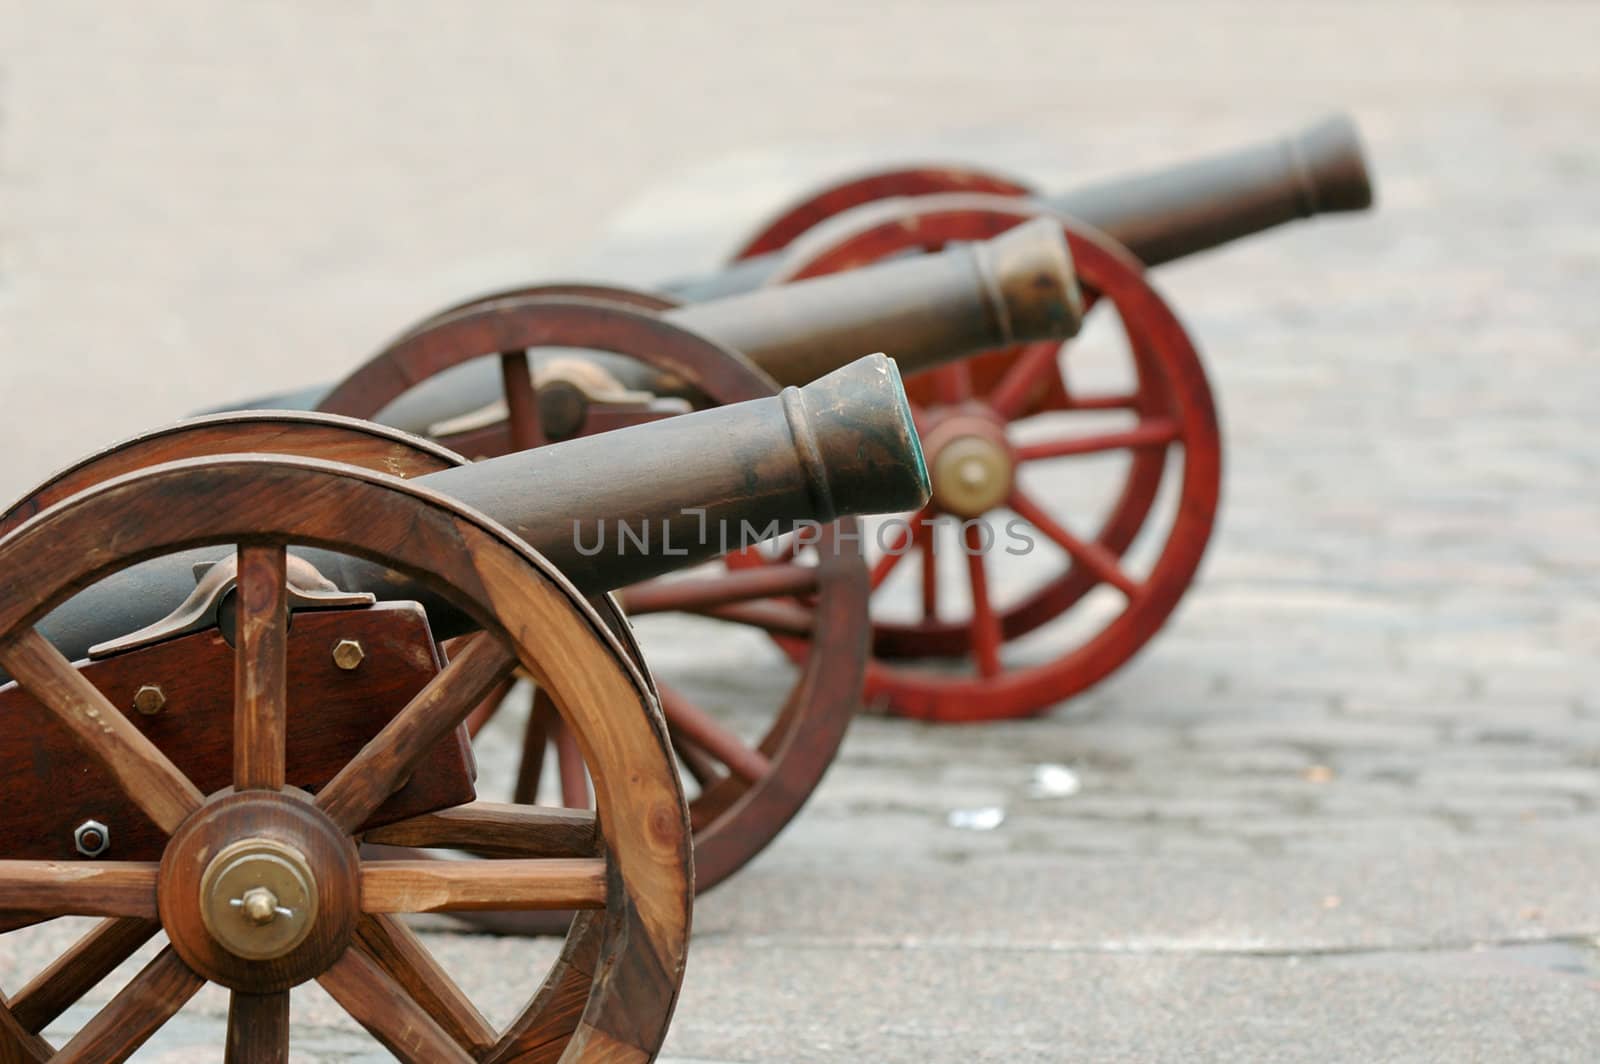 Three cannons are lined up for battle.